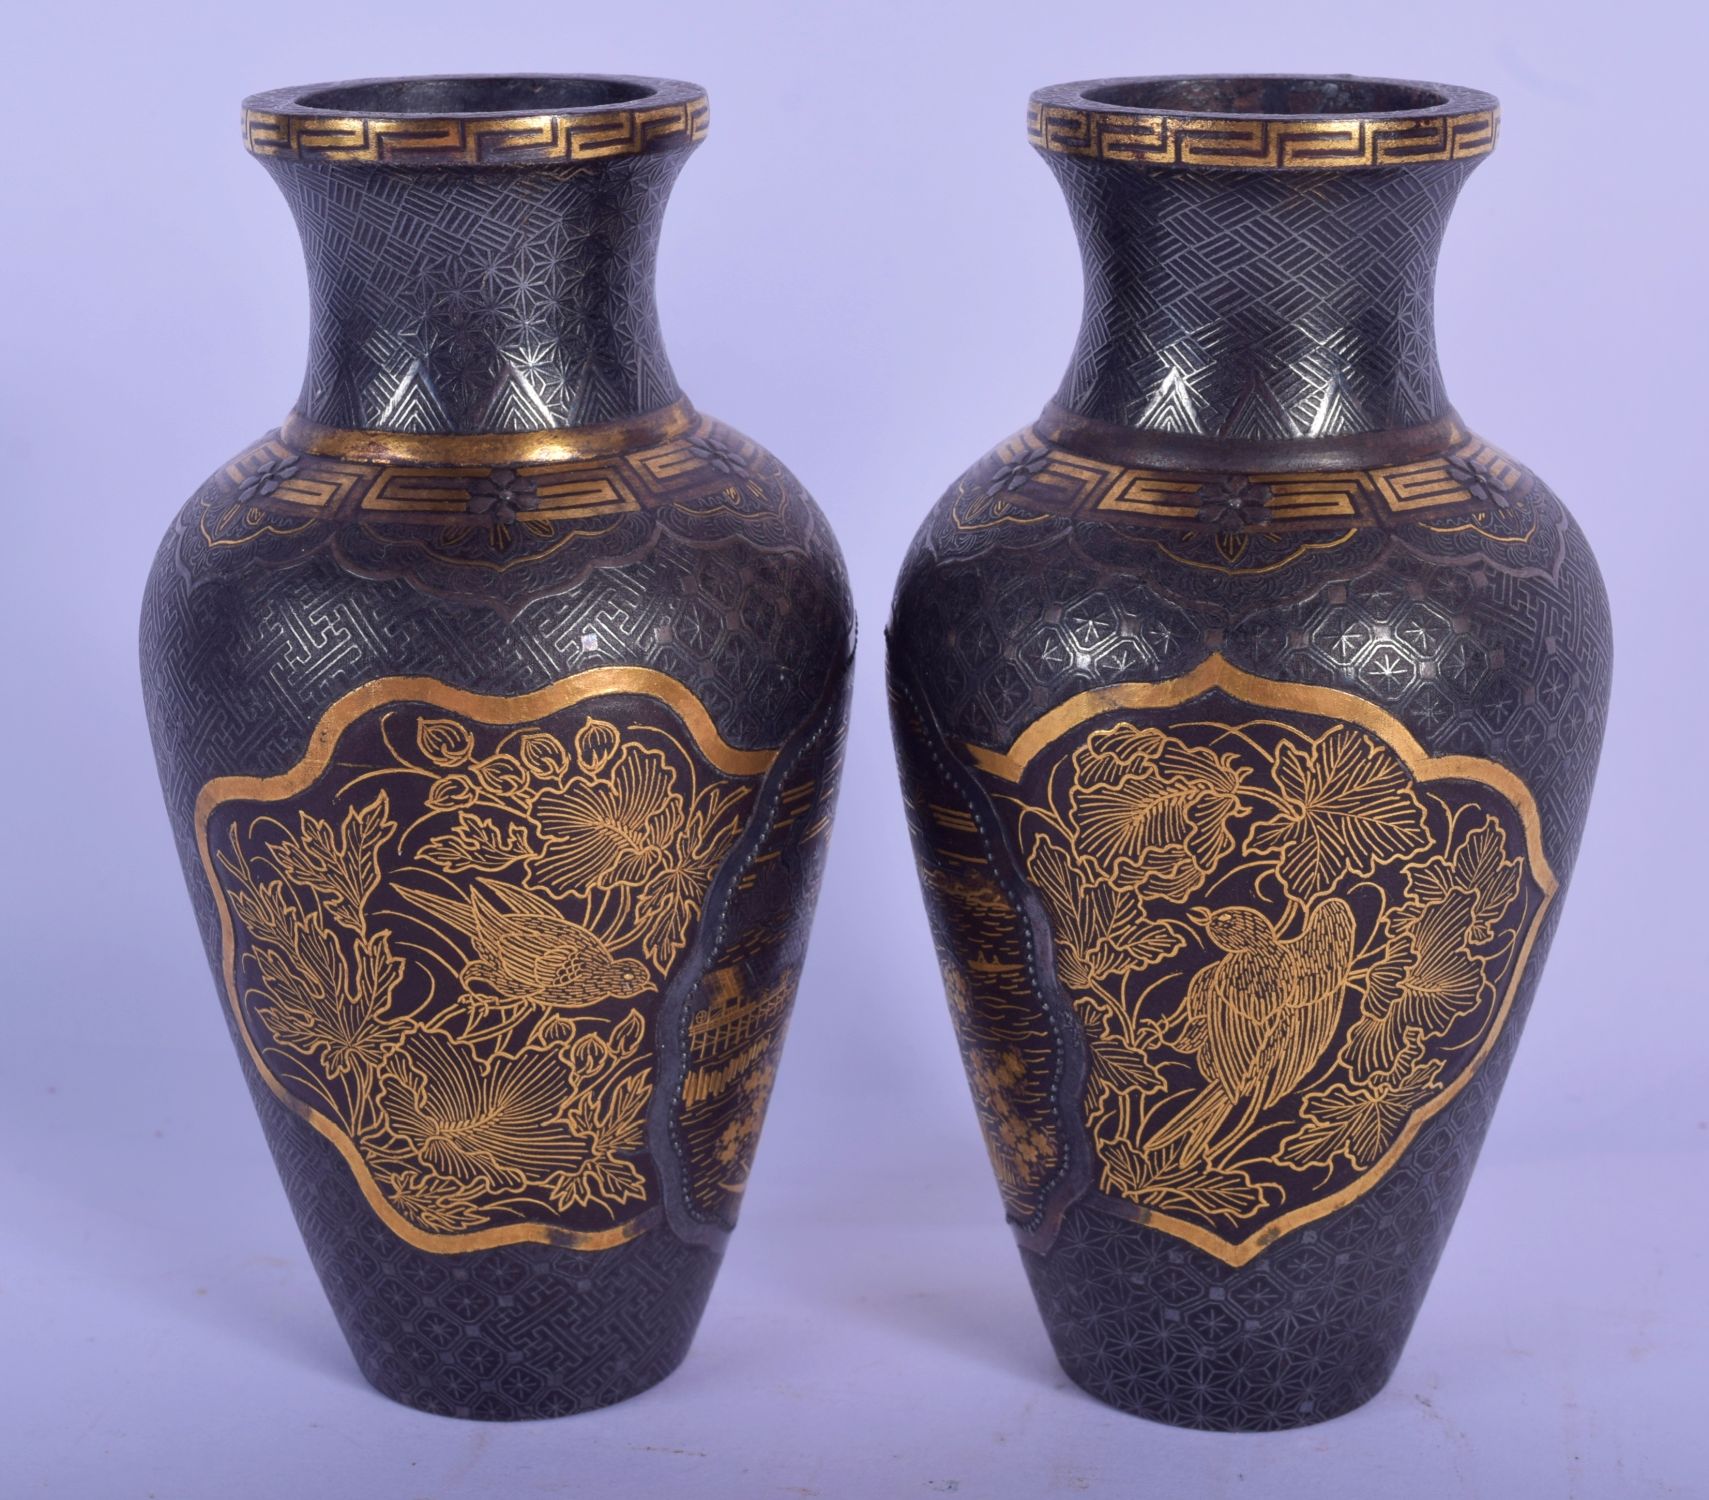 A LOVELY PAIR OF 19TH CENTURY MEIJI PERIOD GOLD AND SILVER INLAID KOMAI VASES decorated with birds a